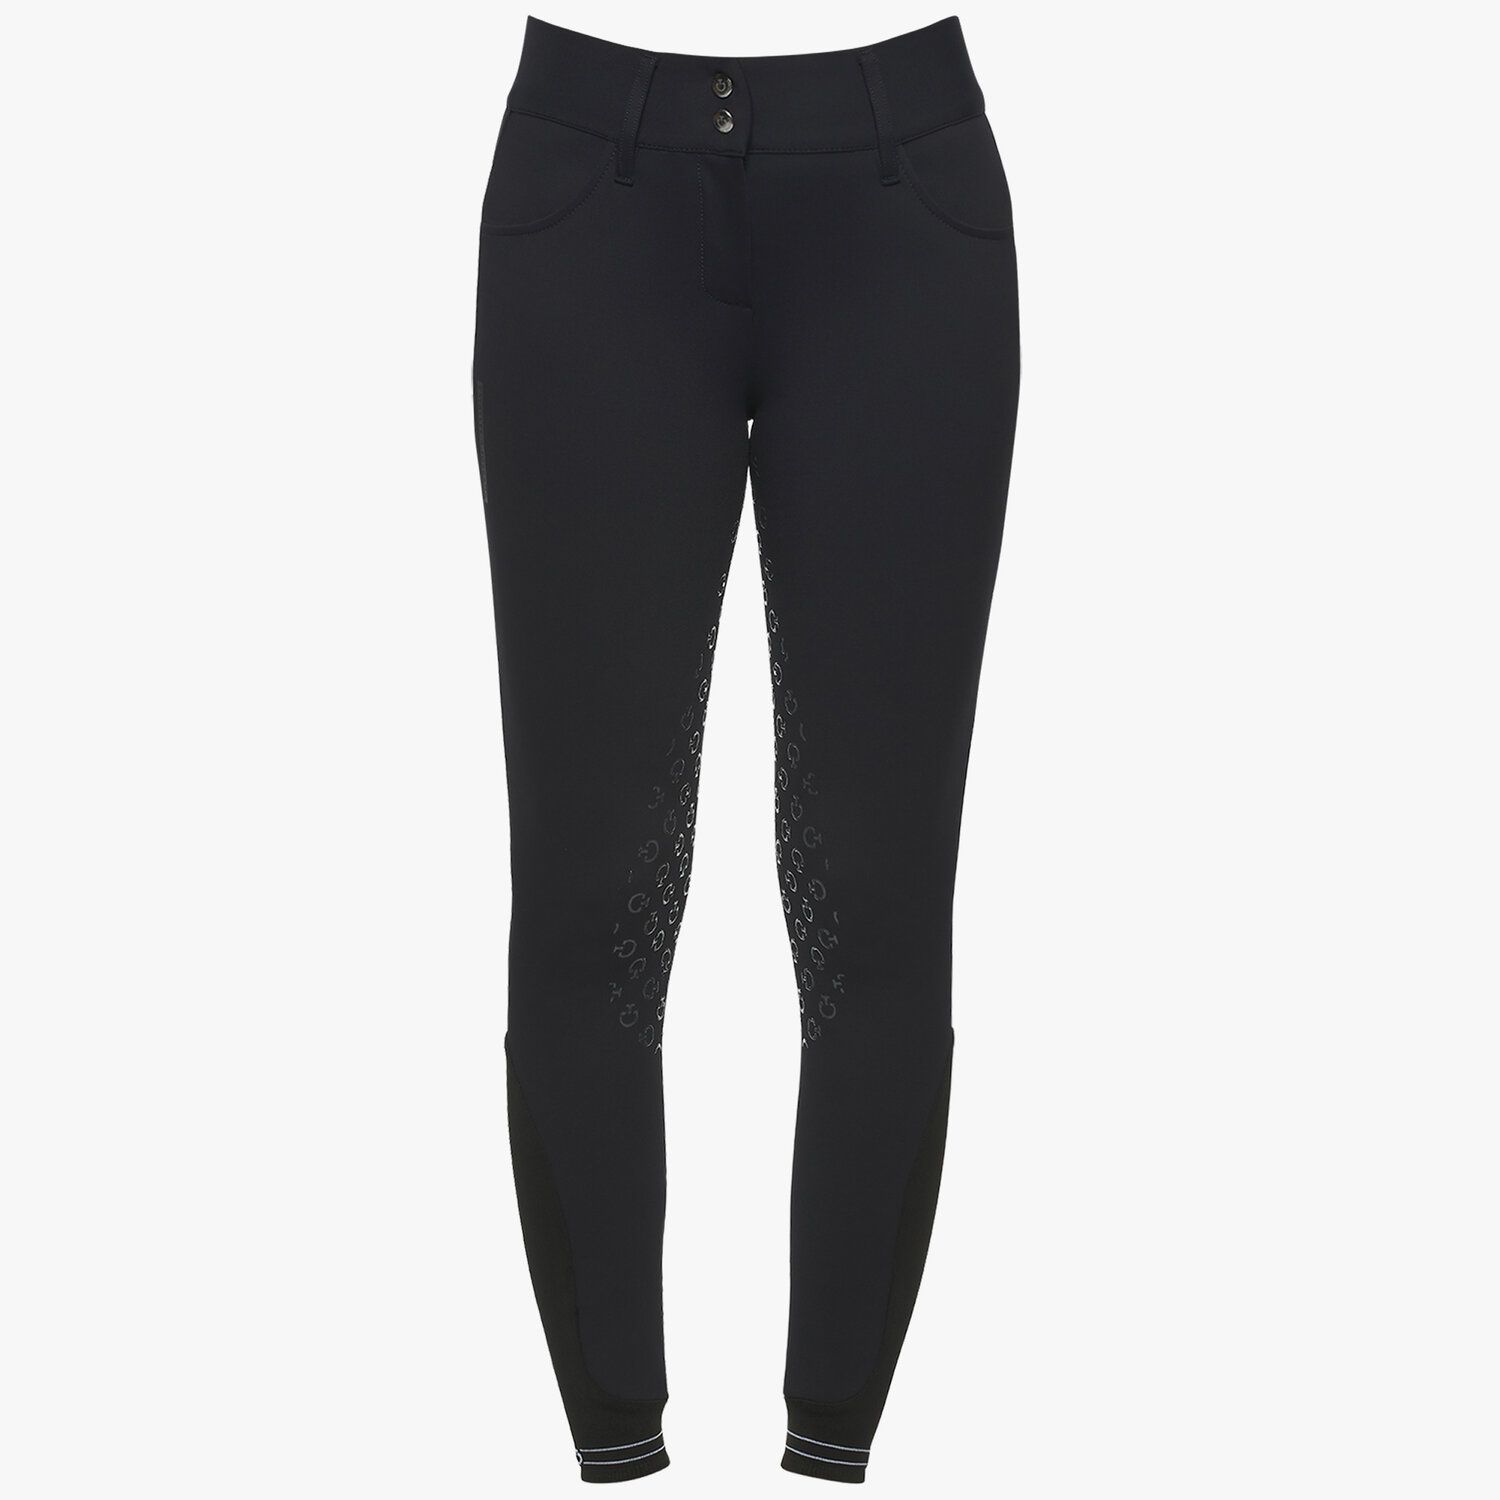 Cavalleria Toscana Women's dressage breeches with perforated logo tape BLACK-2